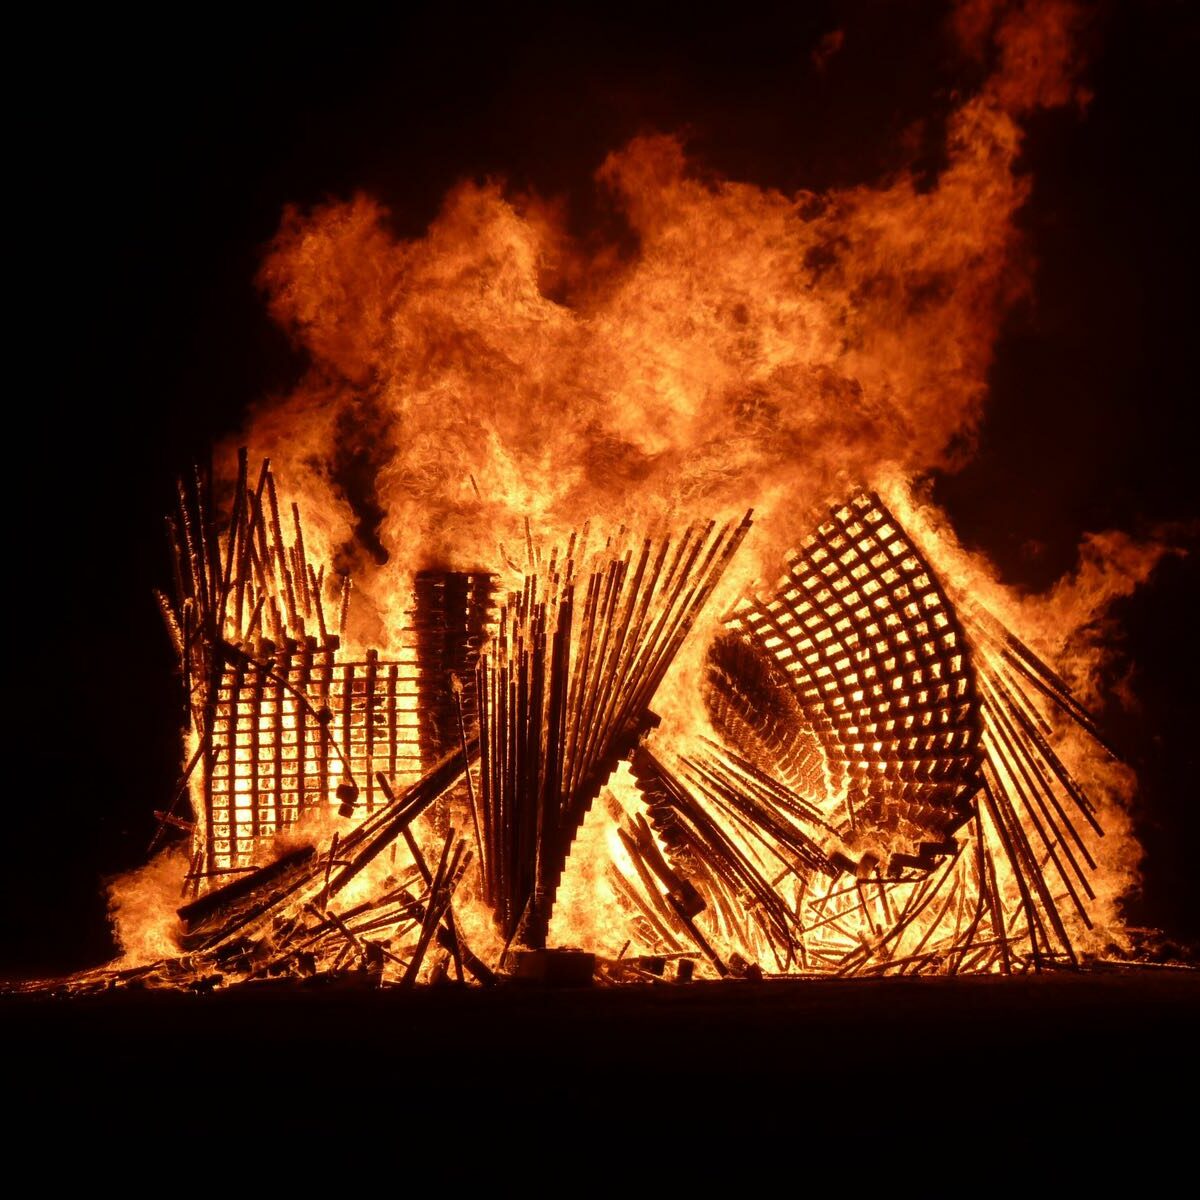 Tangential Dreams at Burning Man 2016- Burning the structure - Photgraphy by Reagan Parrish ©Mamou-Mani